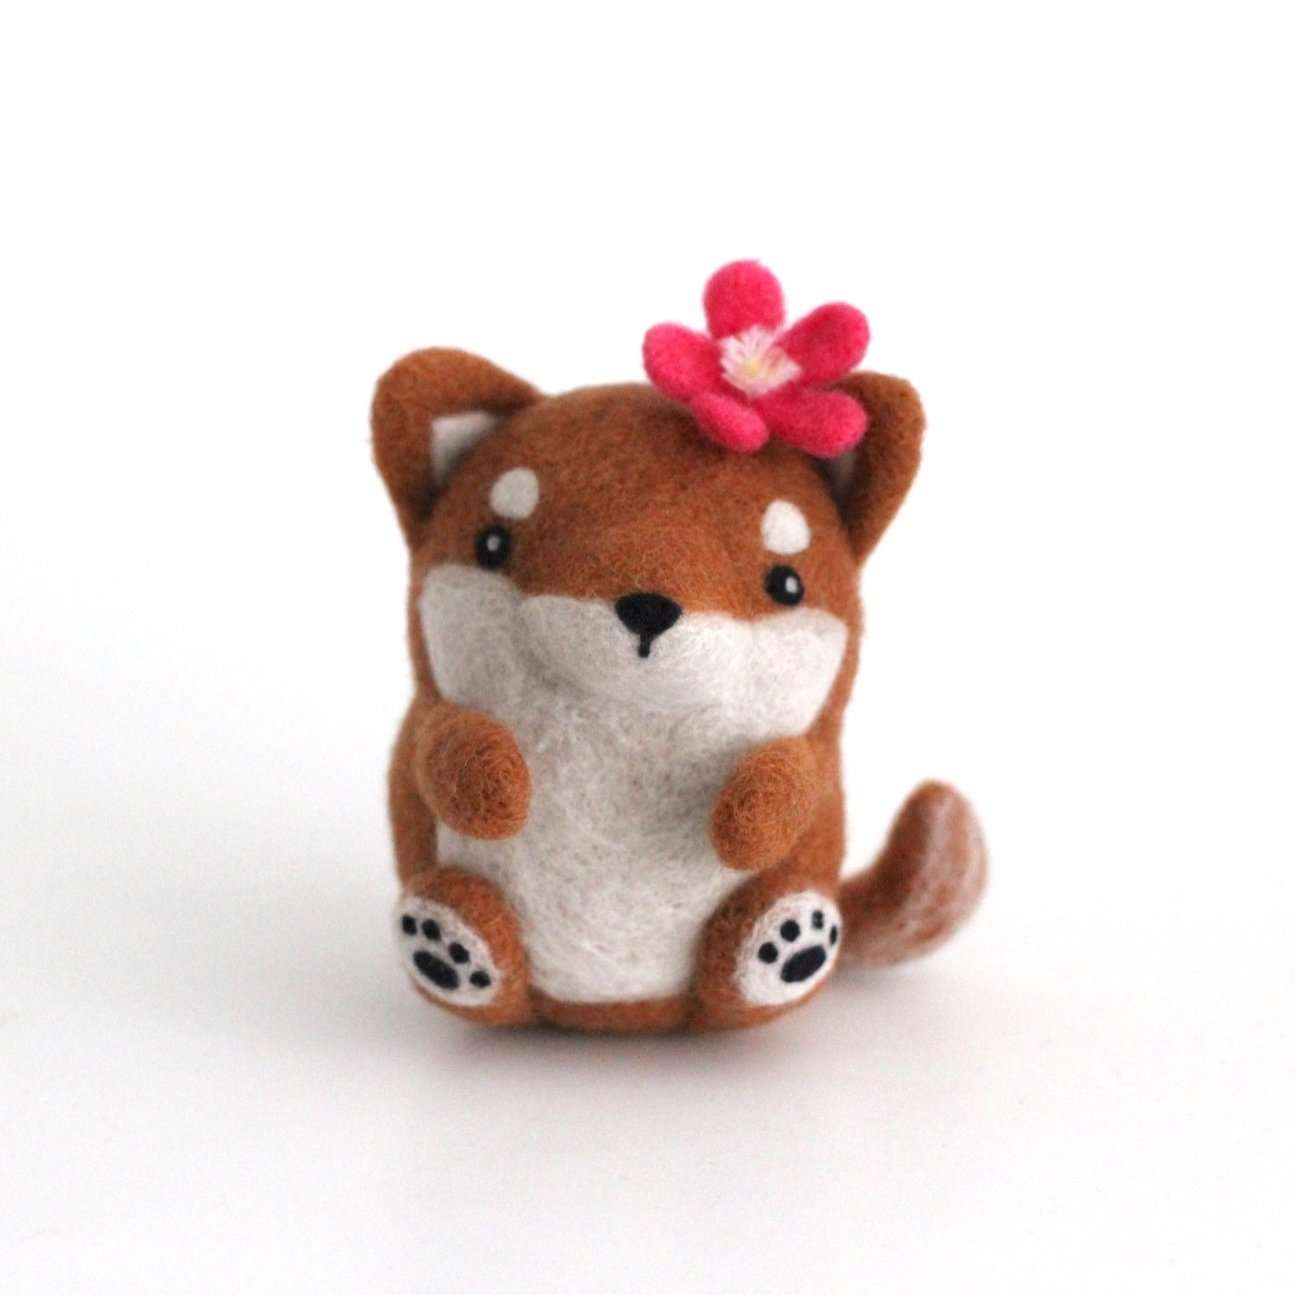 Needle Felted Shiba Inu with a Plum Blossom by Wild Whimsy Woolies